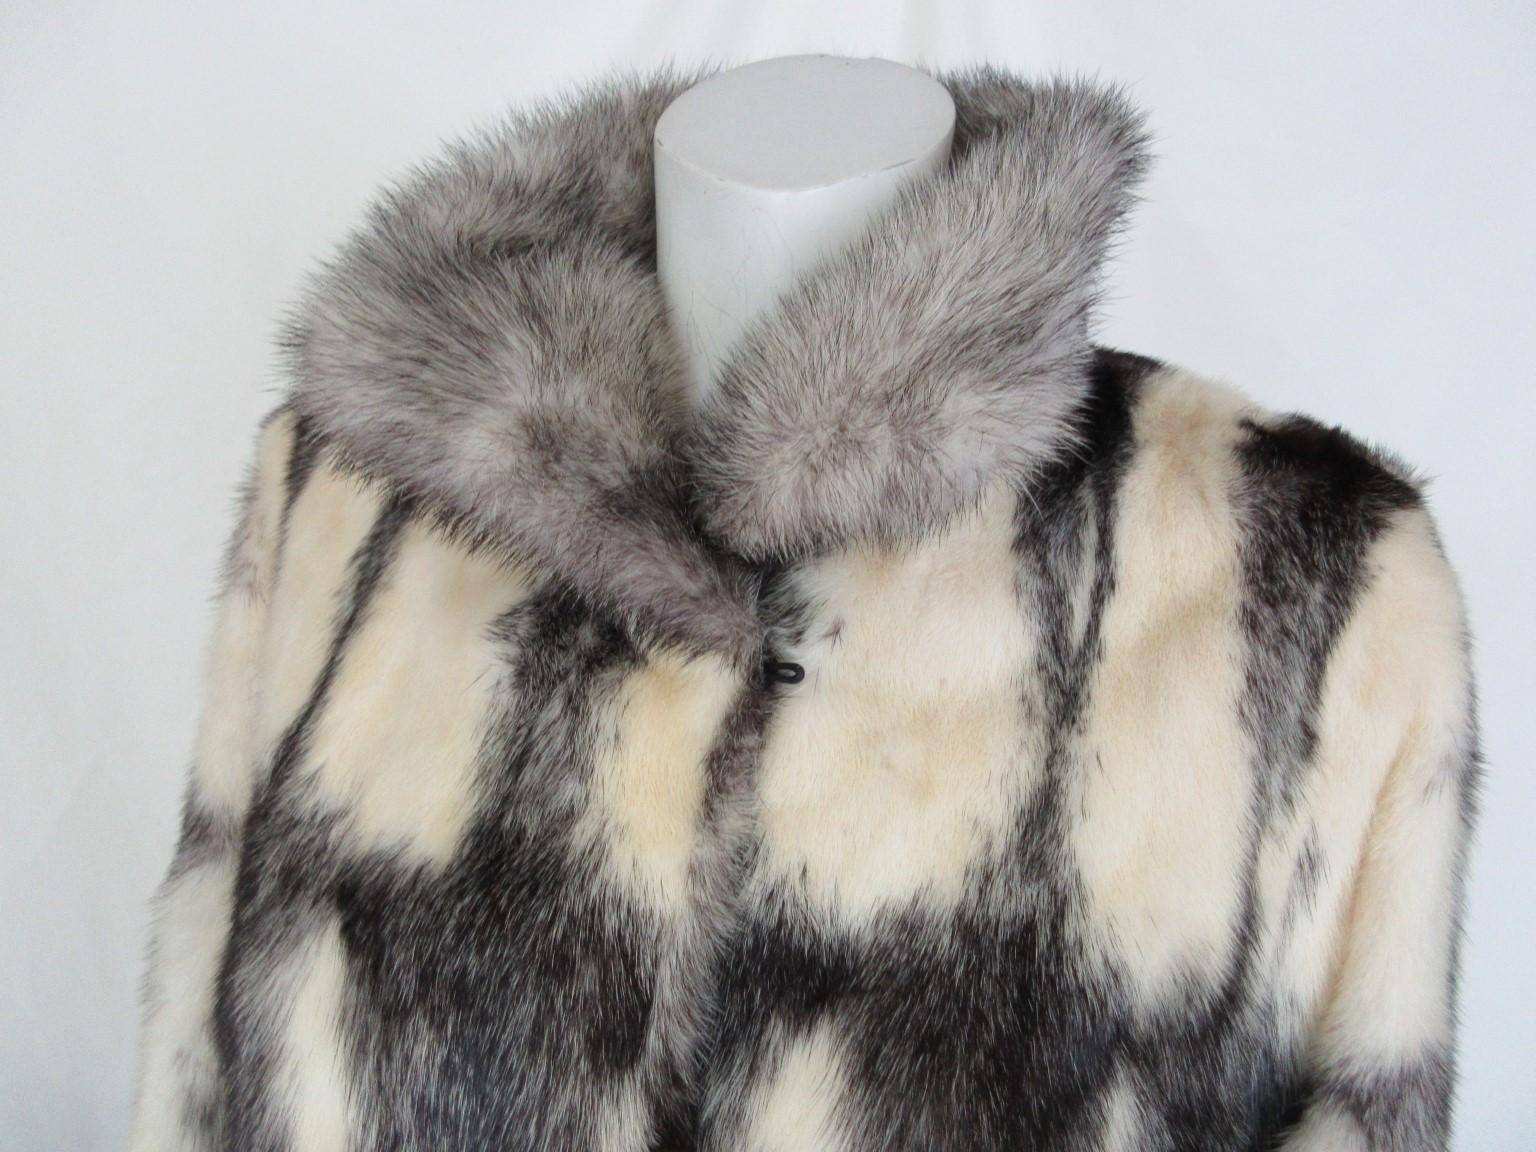 This vintage coat is made of rare soft kohinoor/cross mink fur with a beautiful black lining

Look at our storefront for more mink coats and other vintage items.

Details:
The coat has 1 little inside pocket and 3 closing hooks
narrow sleeves ends